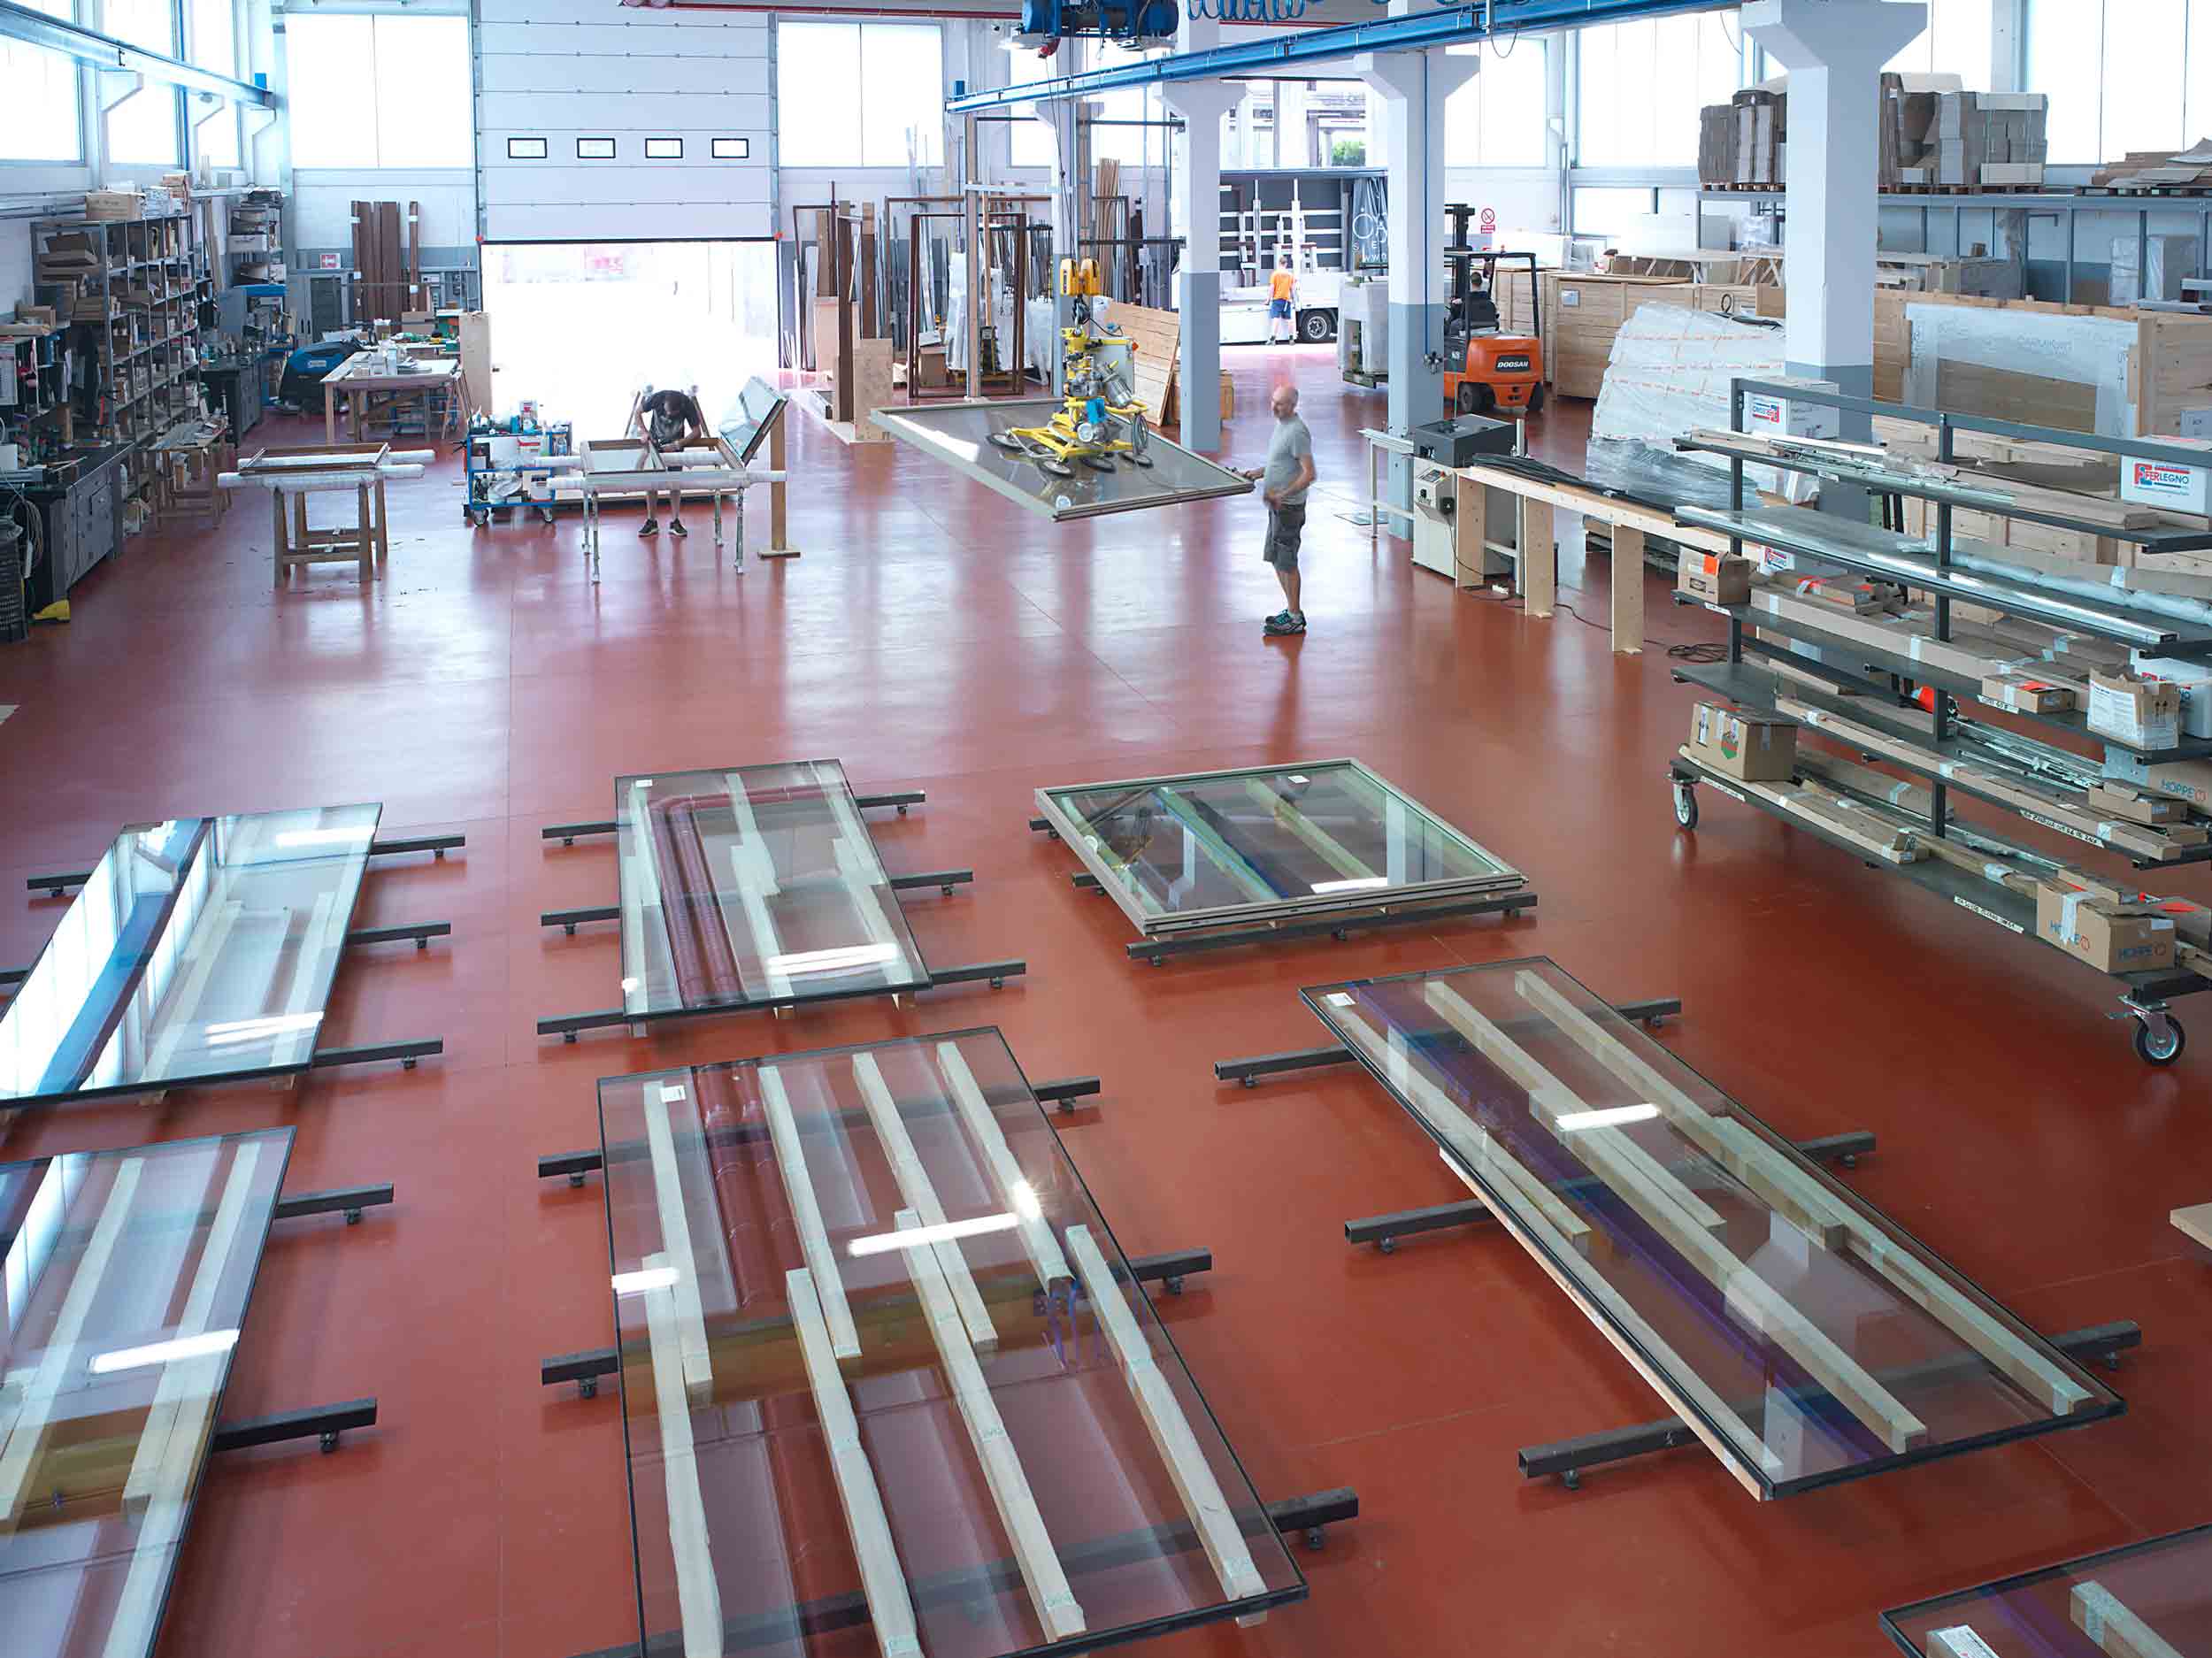 General view of the warehouse with the various stages of product assembly